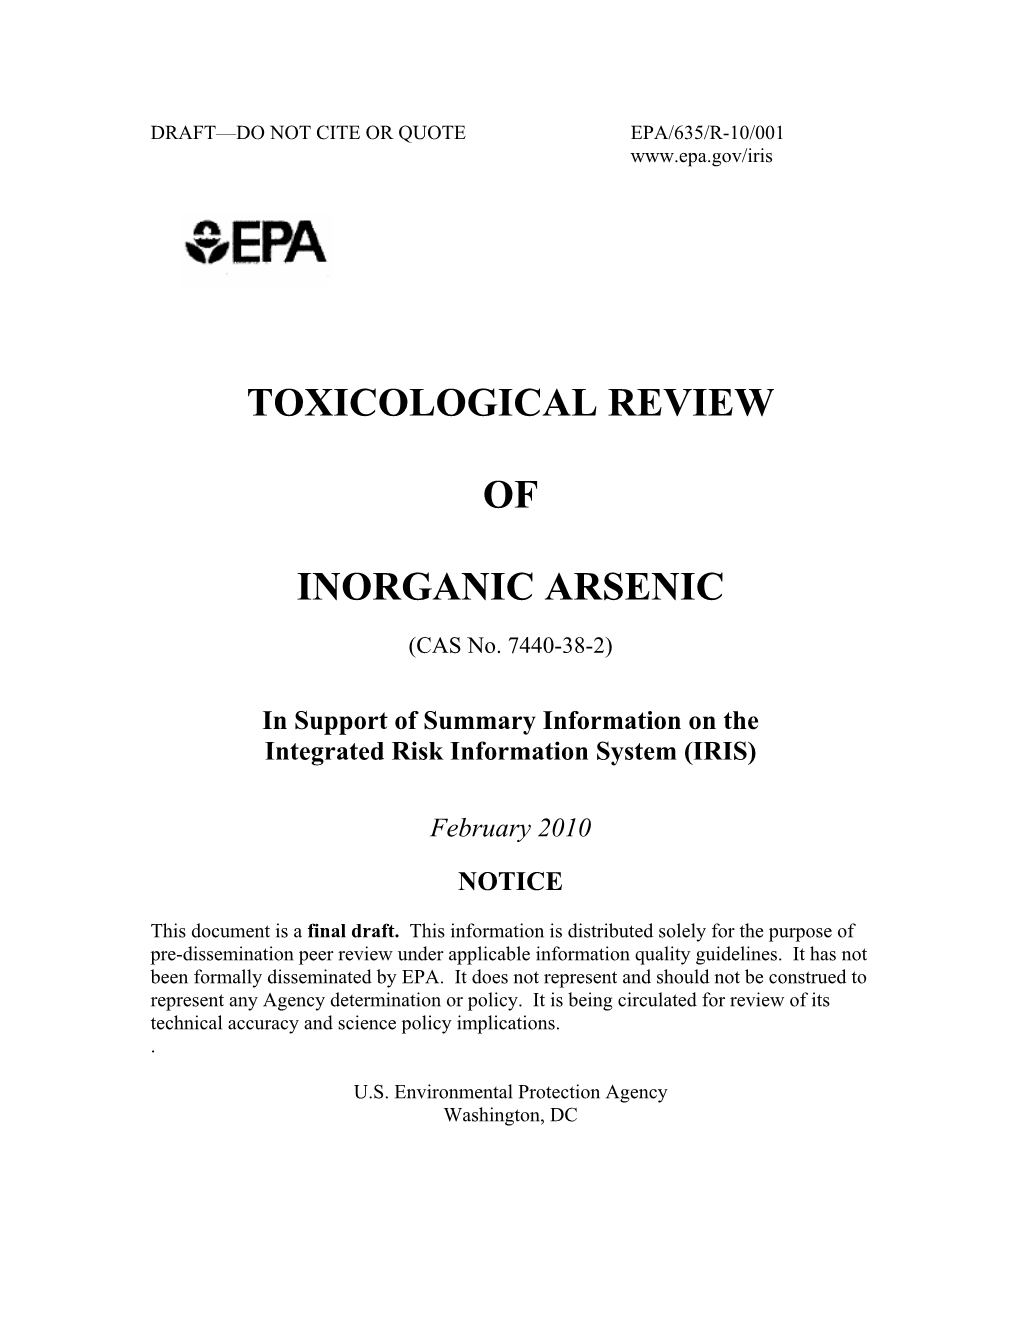 TOXICOLOGICAL REVIEW of INORGANIC ARSENIC (CAS No